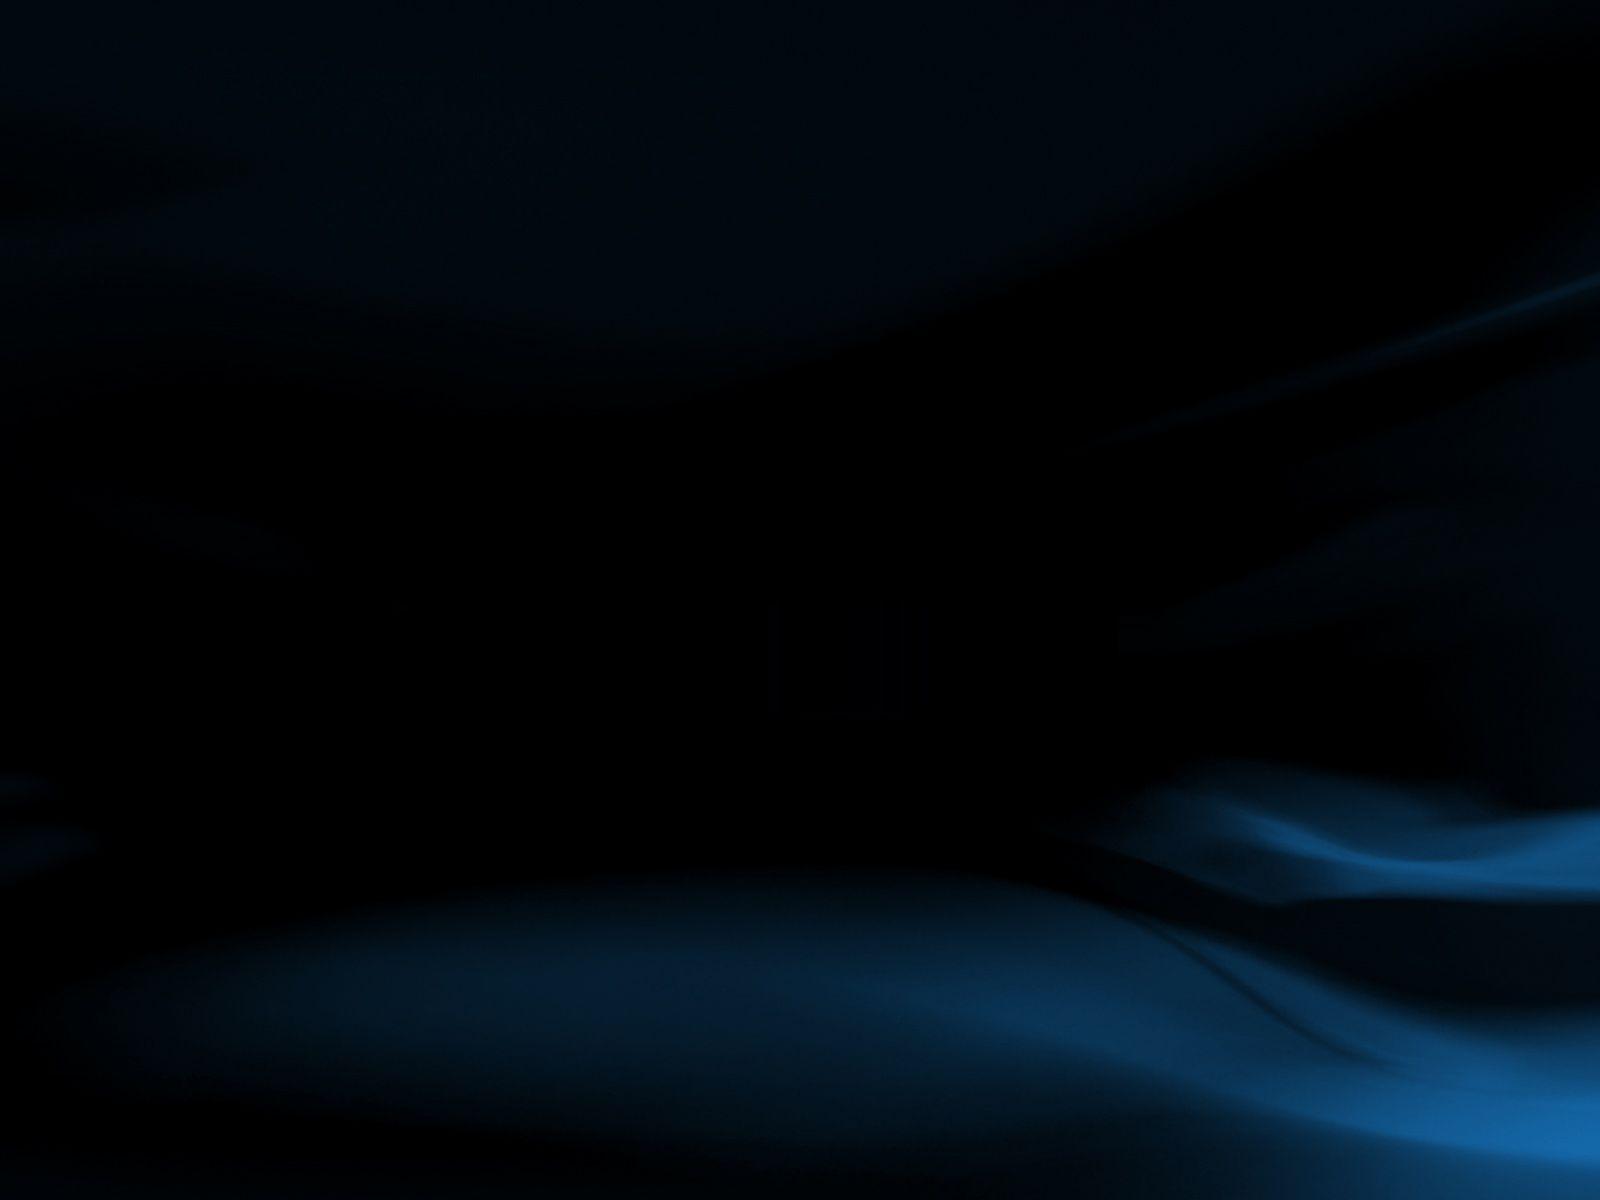 Dark Blue And Black Abstract Backgrounds - Wallpaper Cave